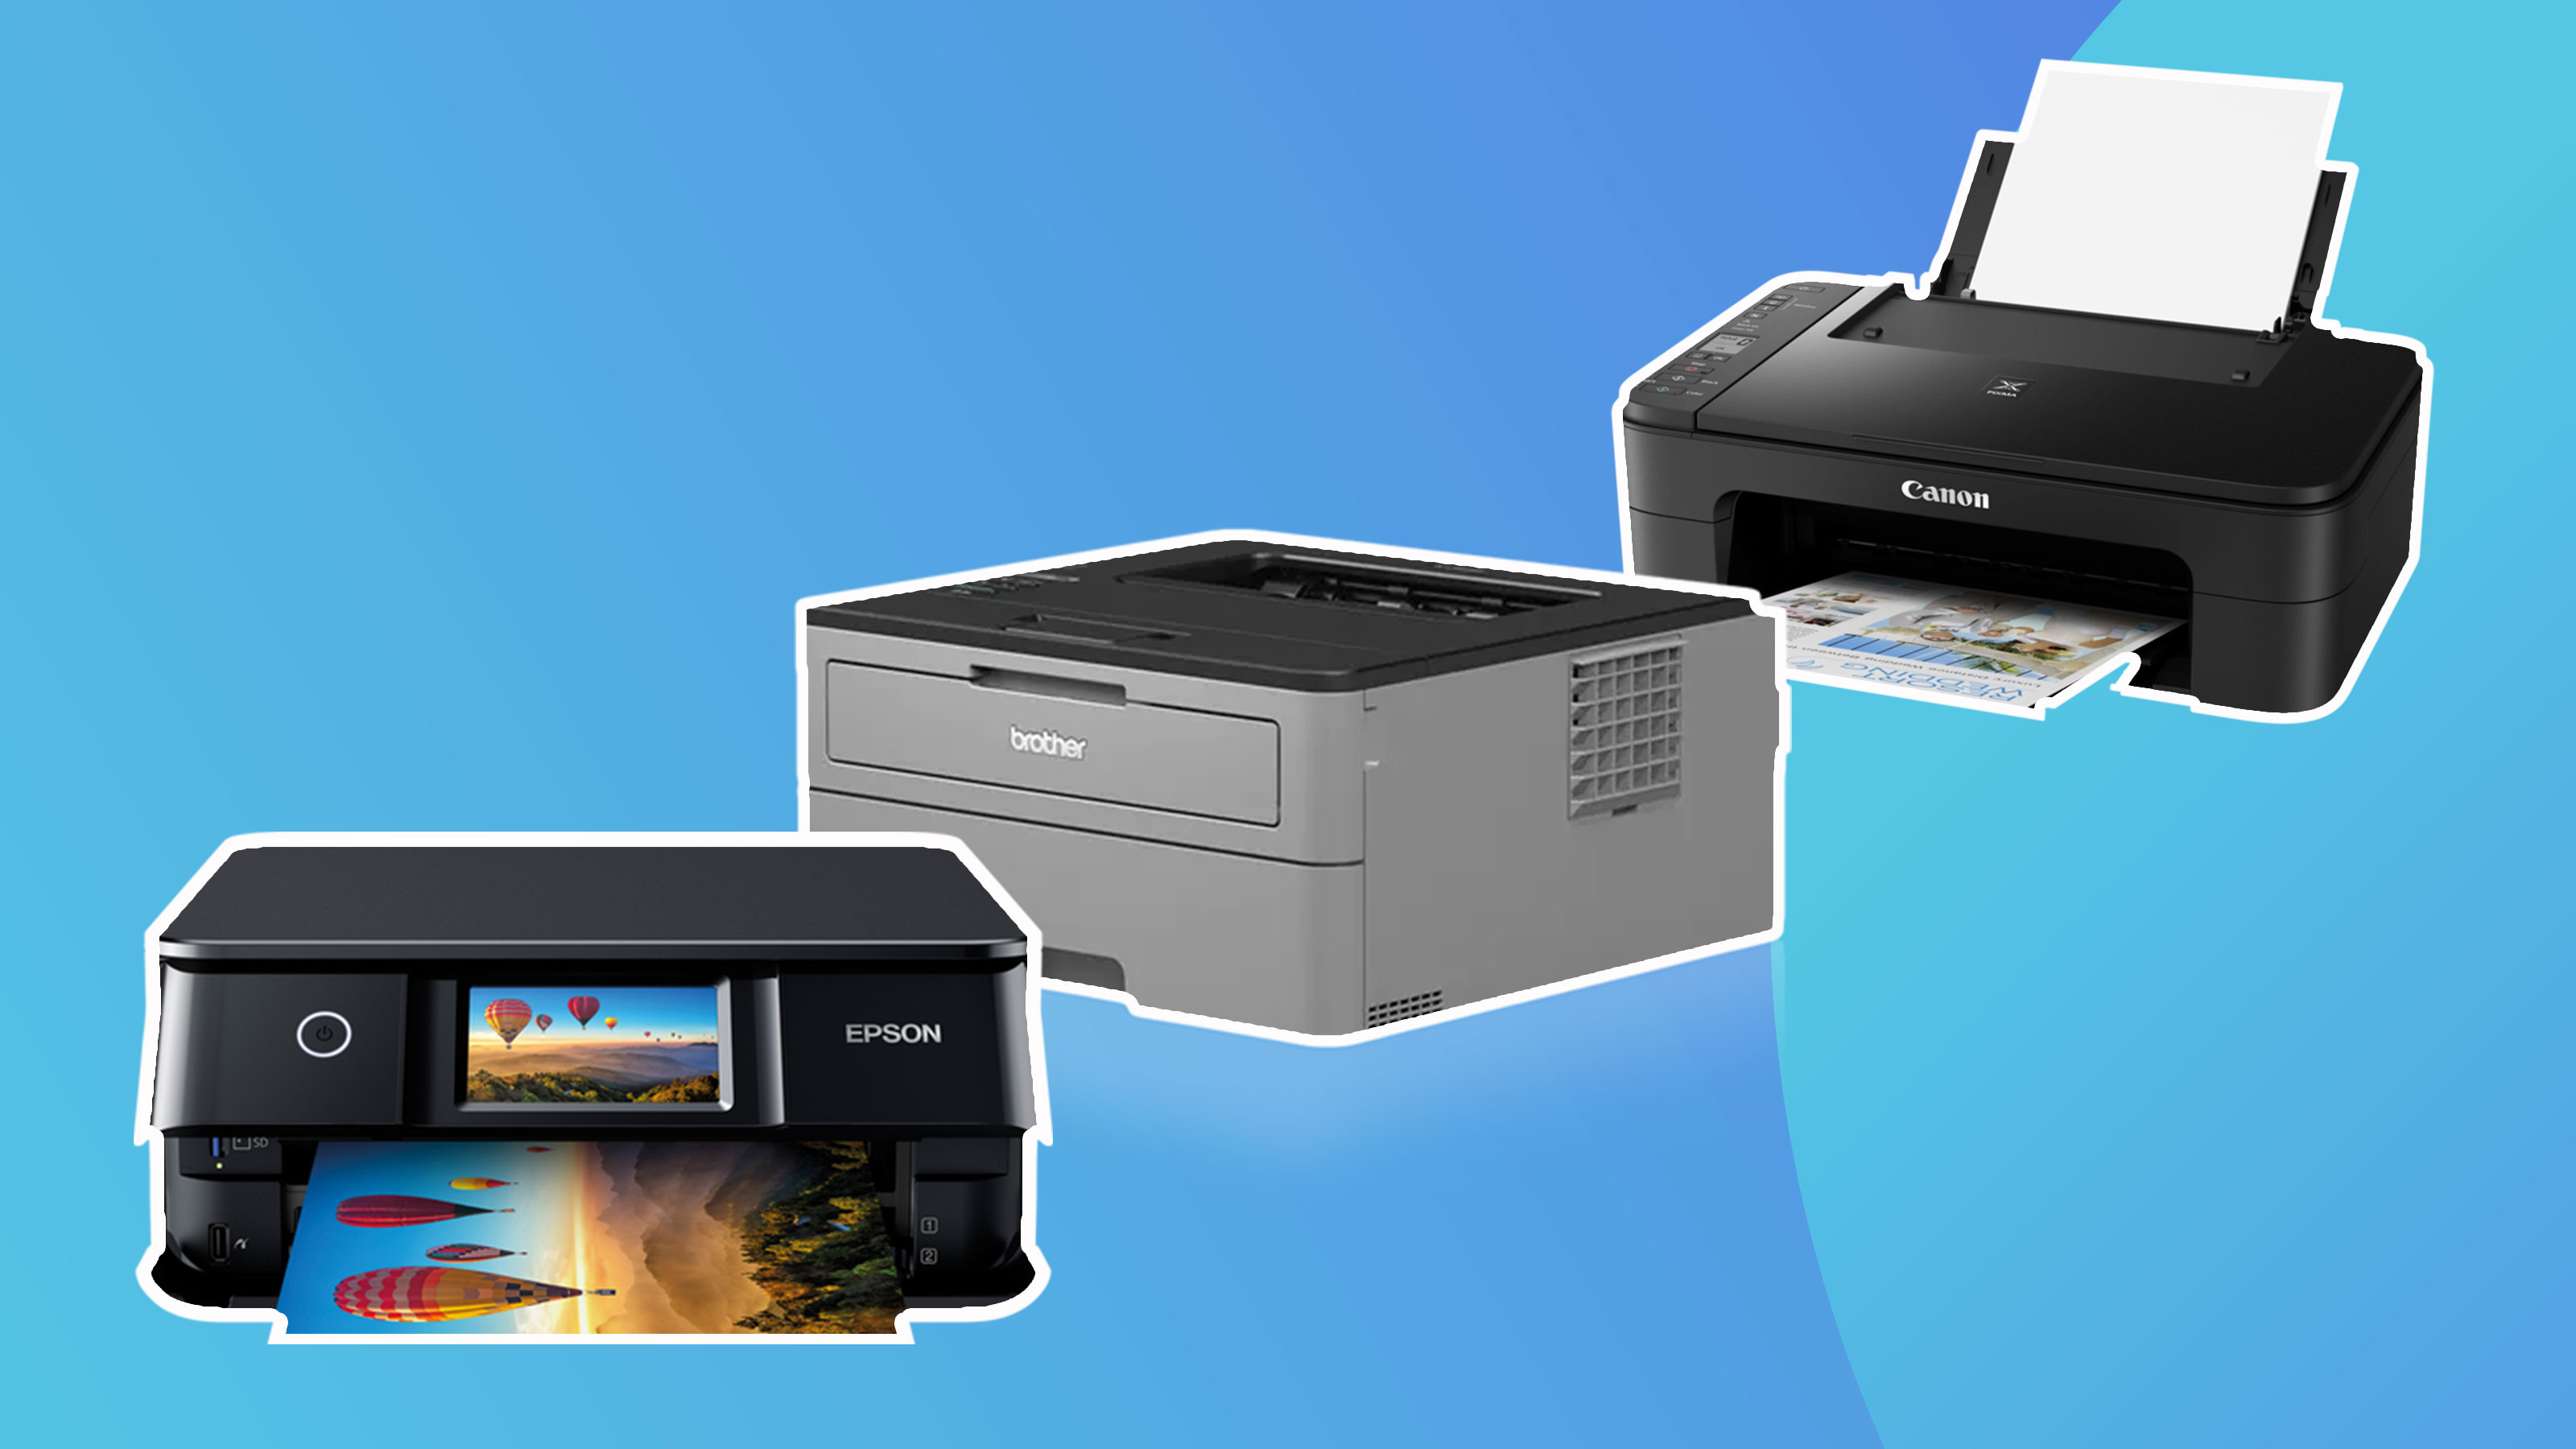 Own a printer you can truly rely on with Brother 